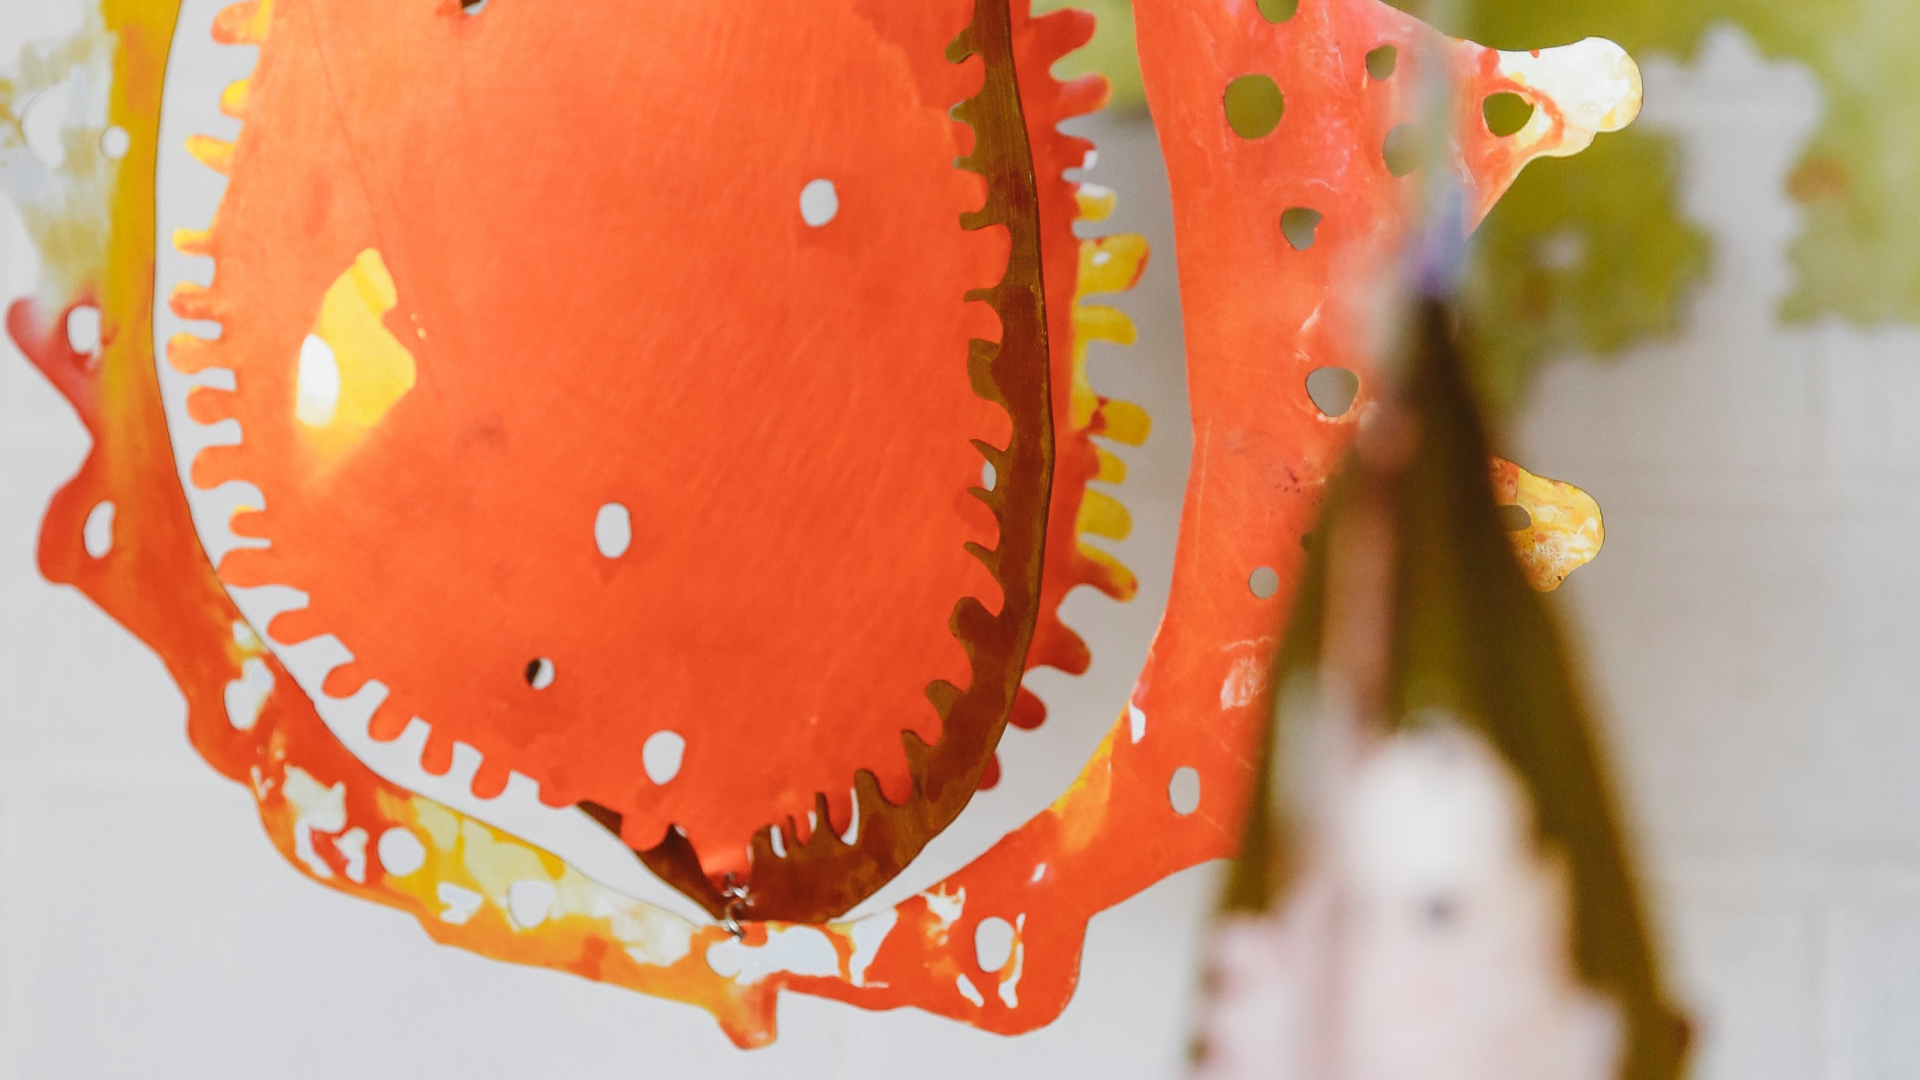 Colourful metal wall sculptures, images of seeds and lichen and nature forms